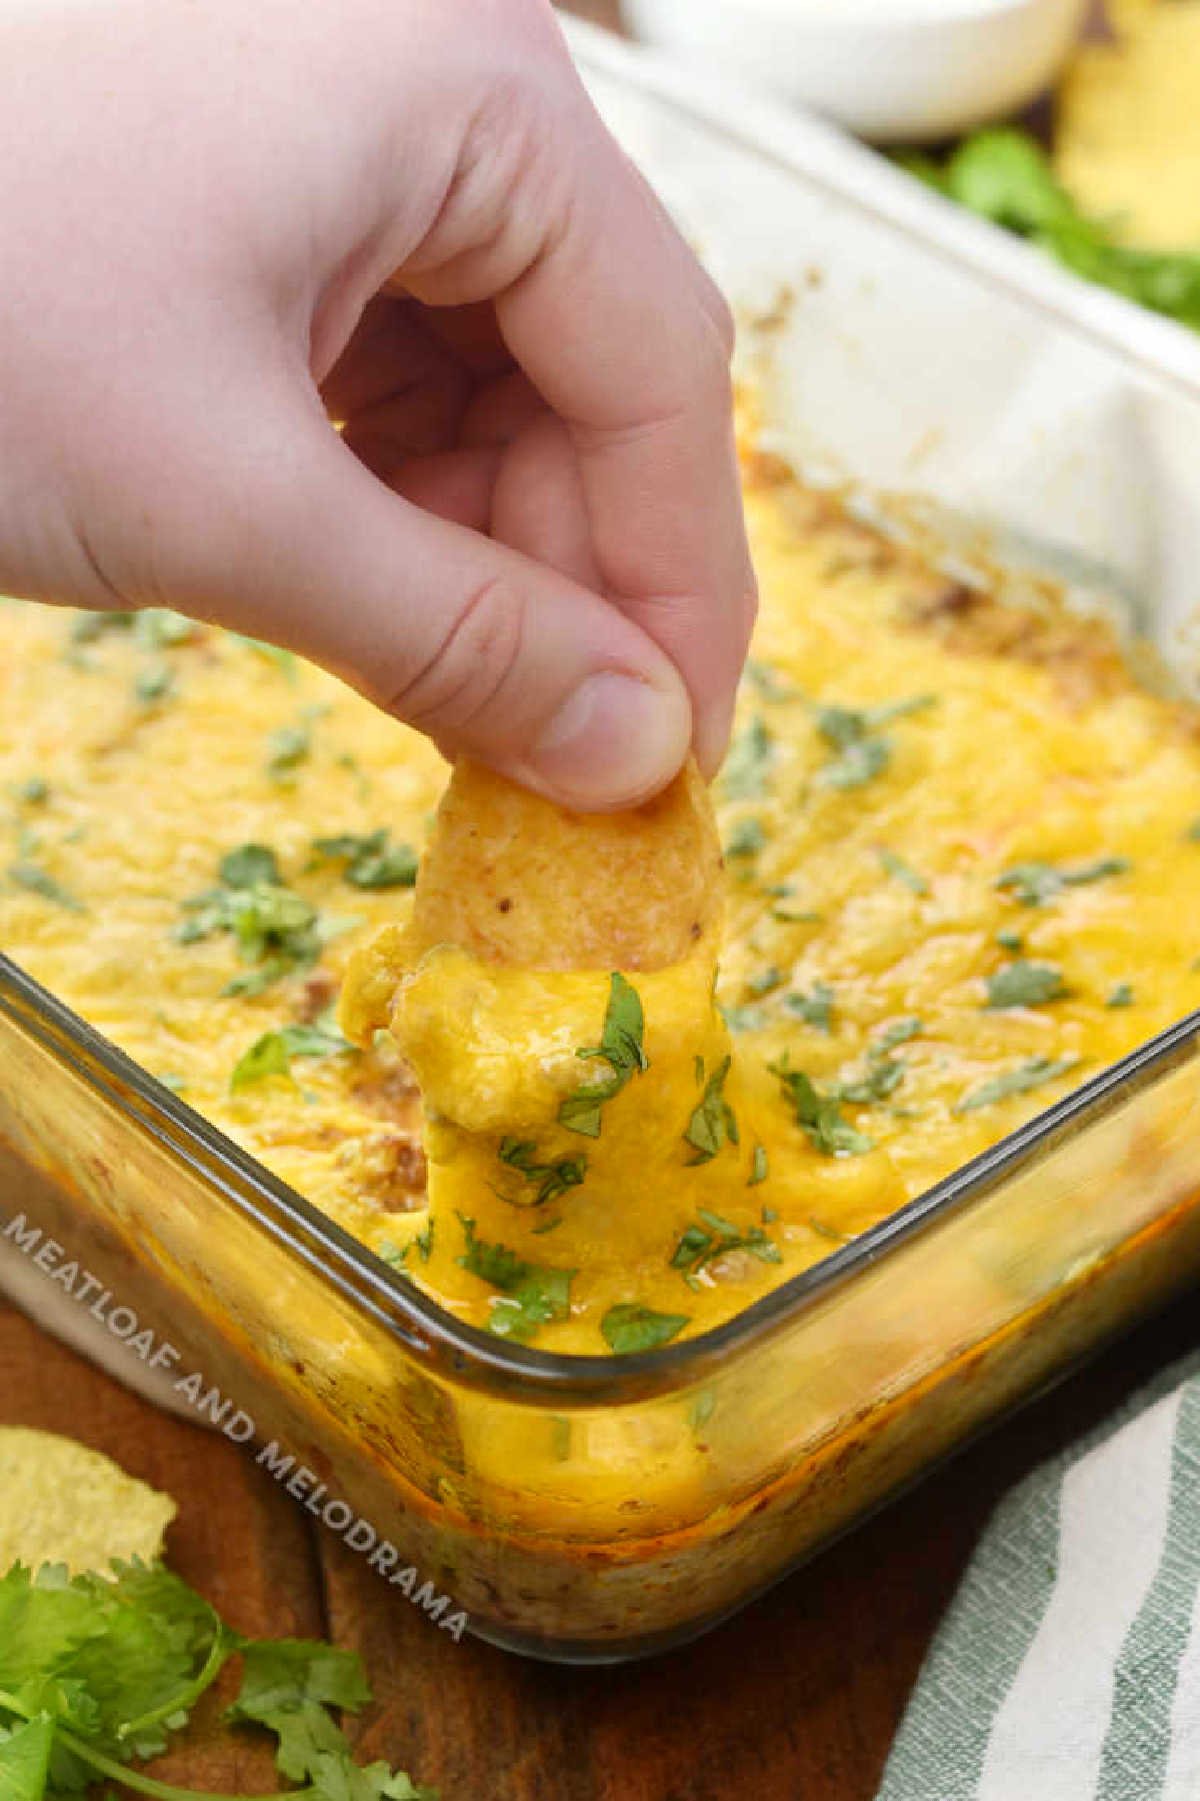 dip frito chip into baked taco dip with ground beef and cheese